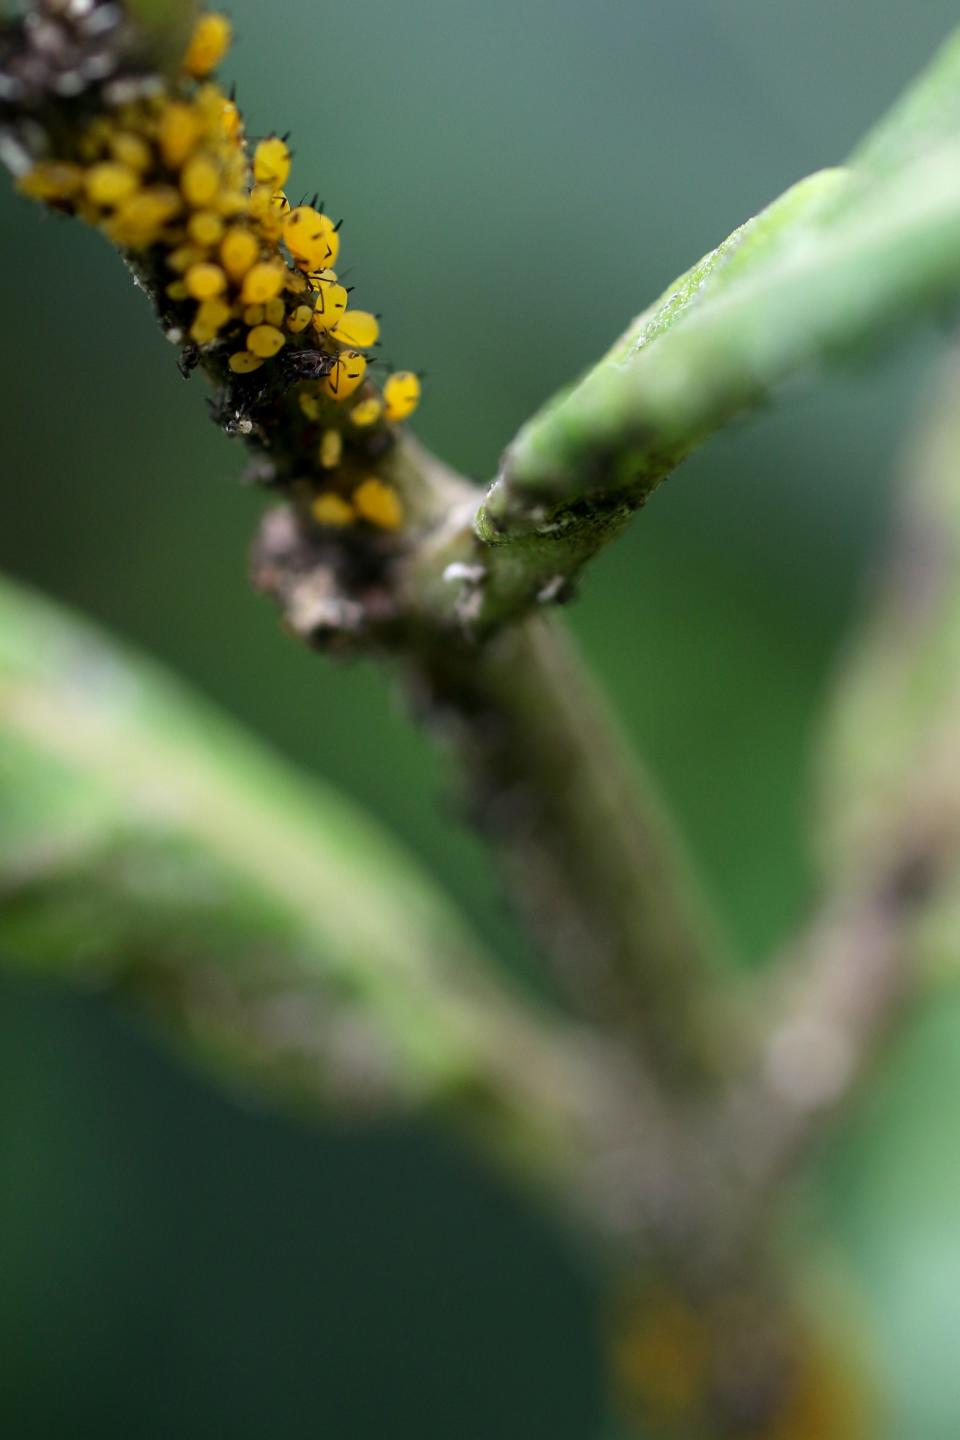 Milkweed aphids are shown on a plant.